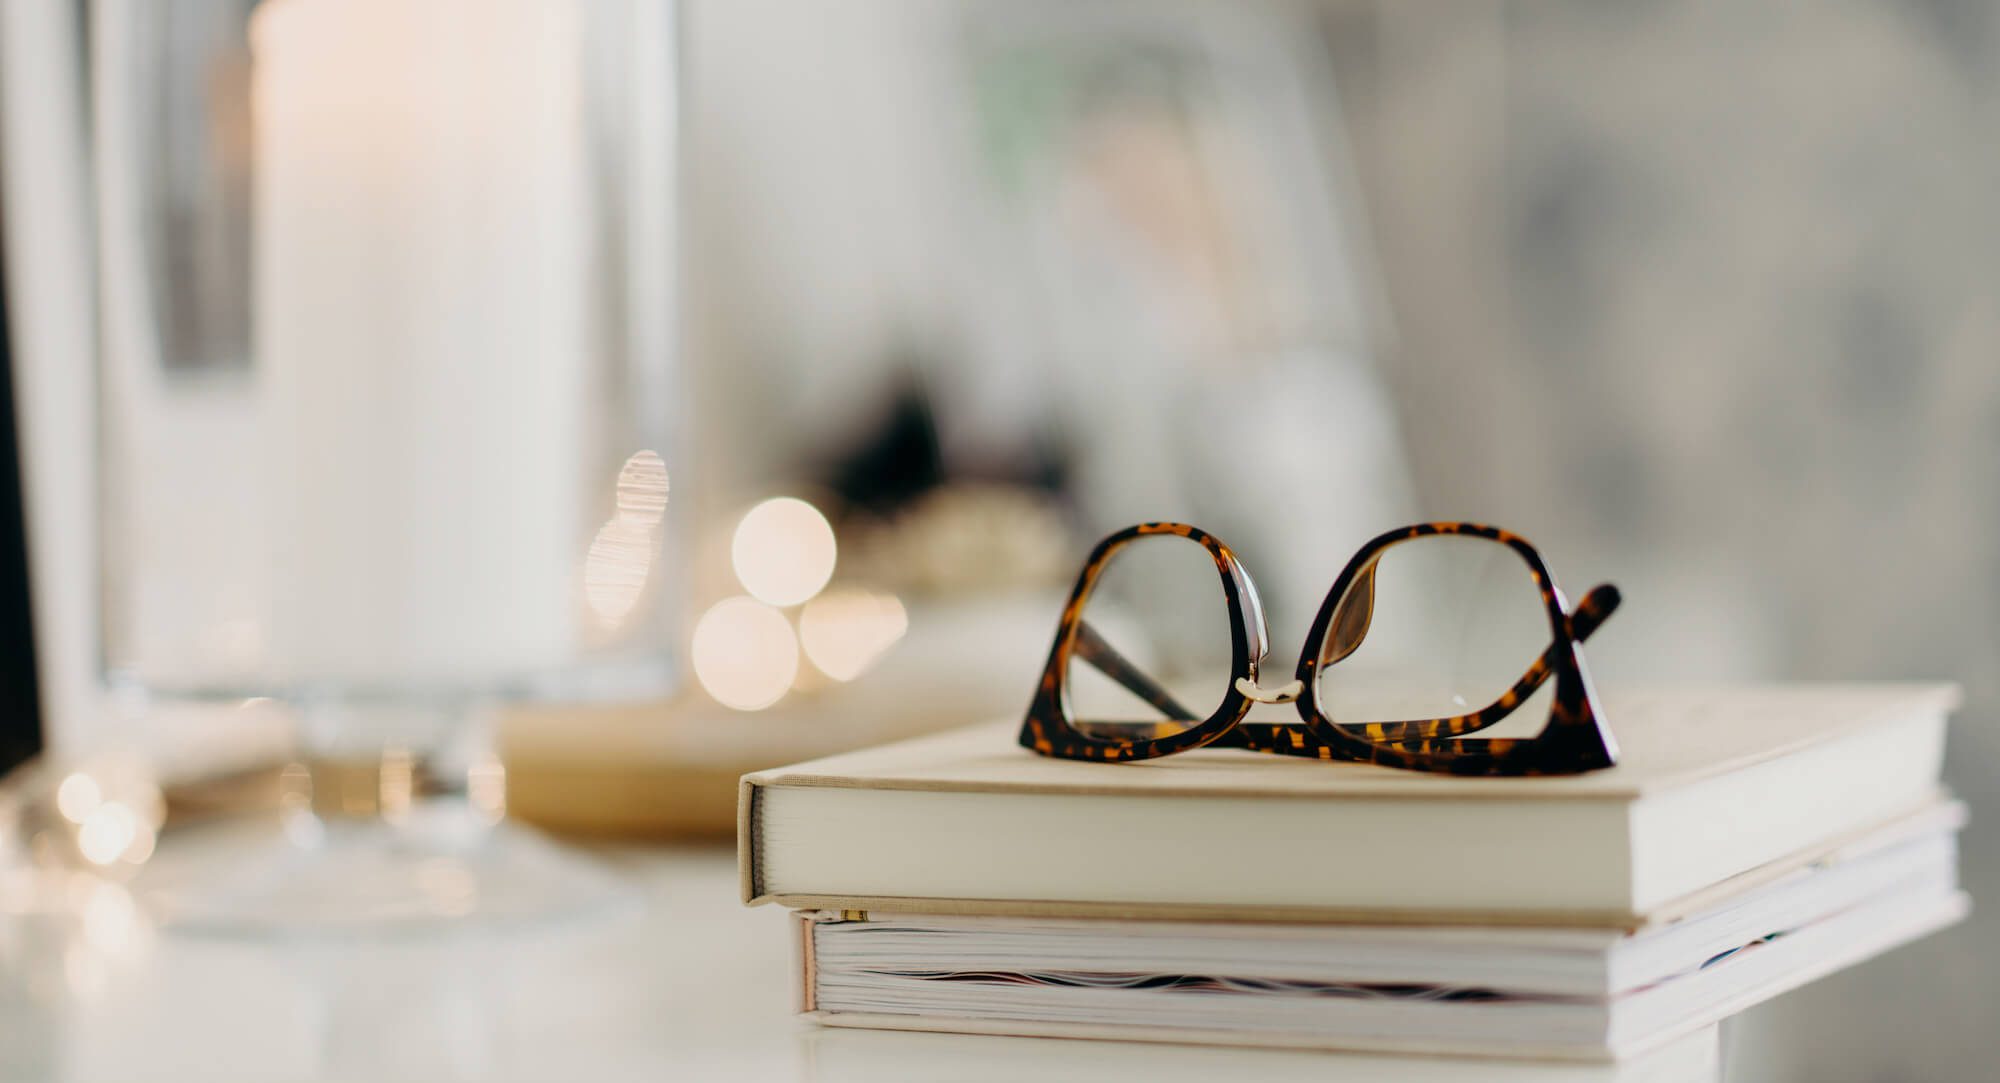 Pair of glasses on a stack of books